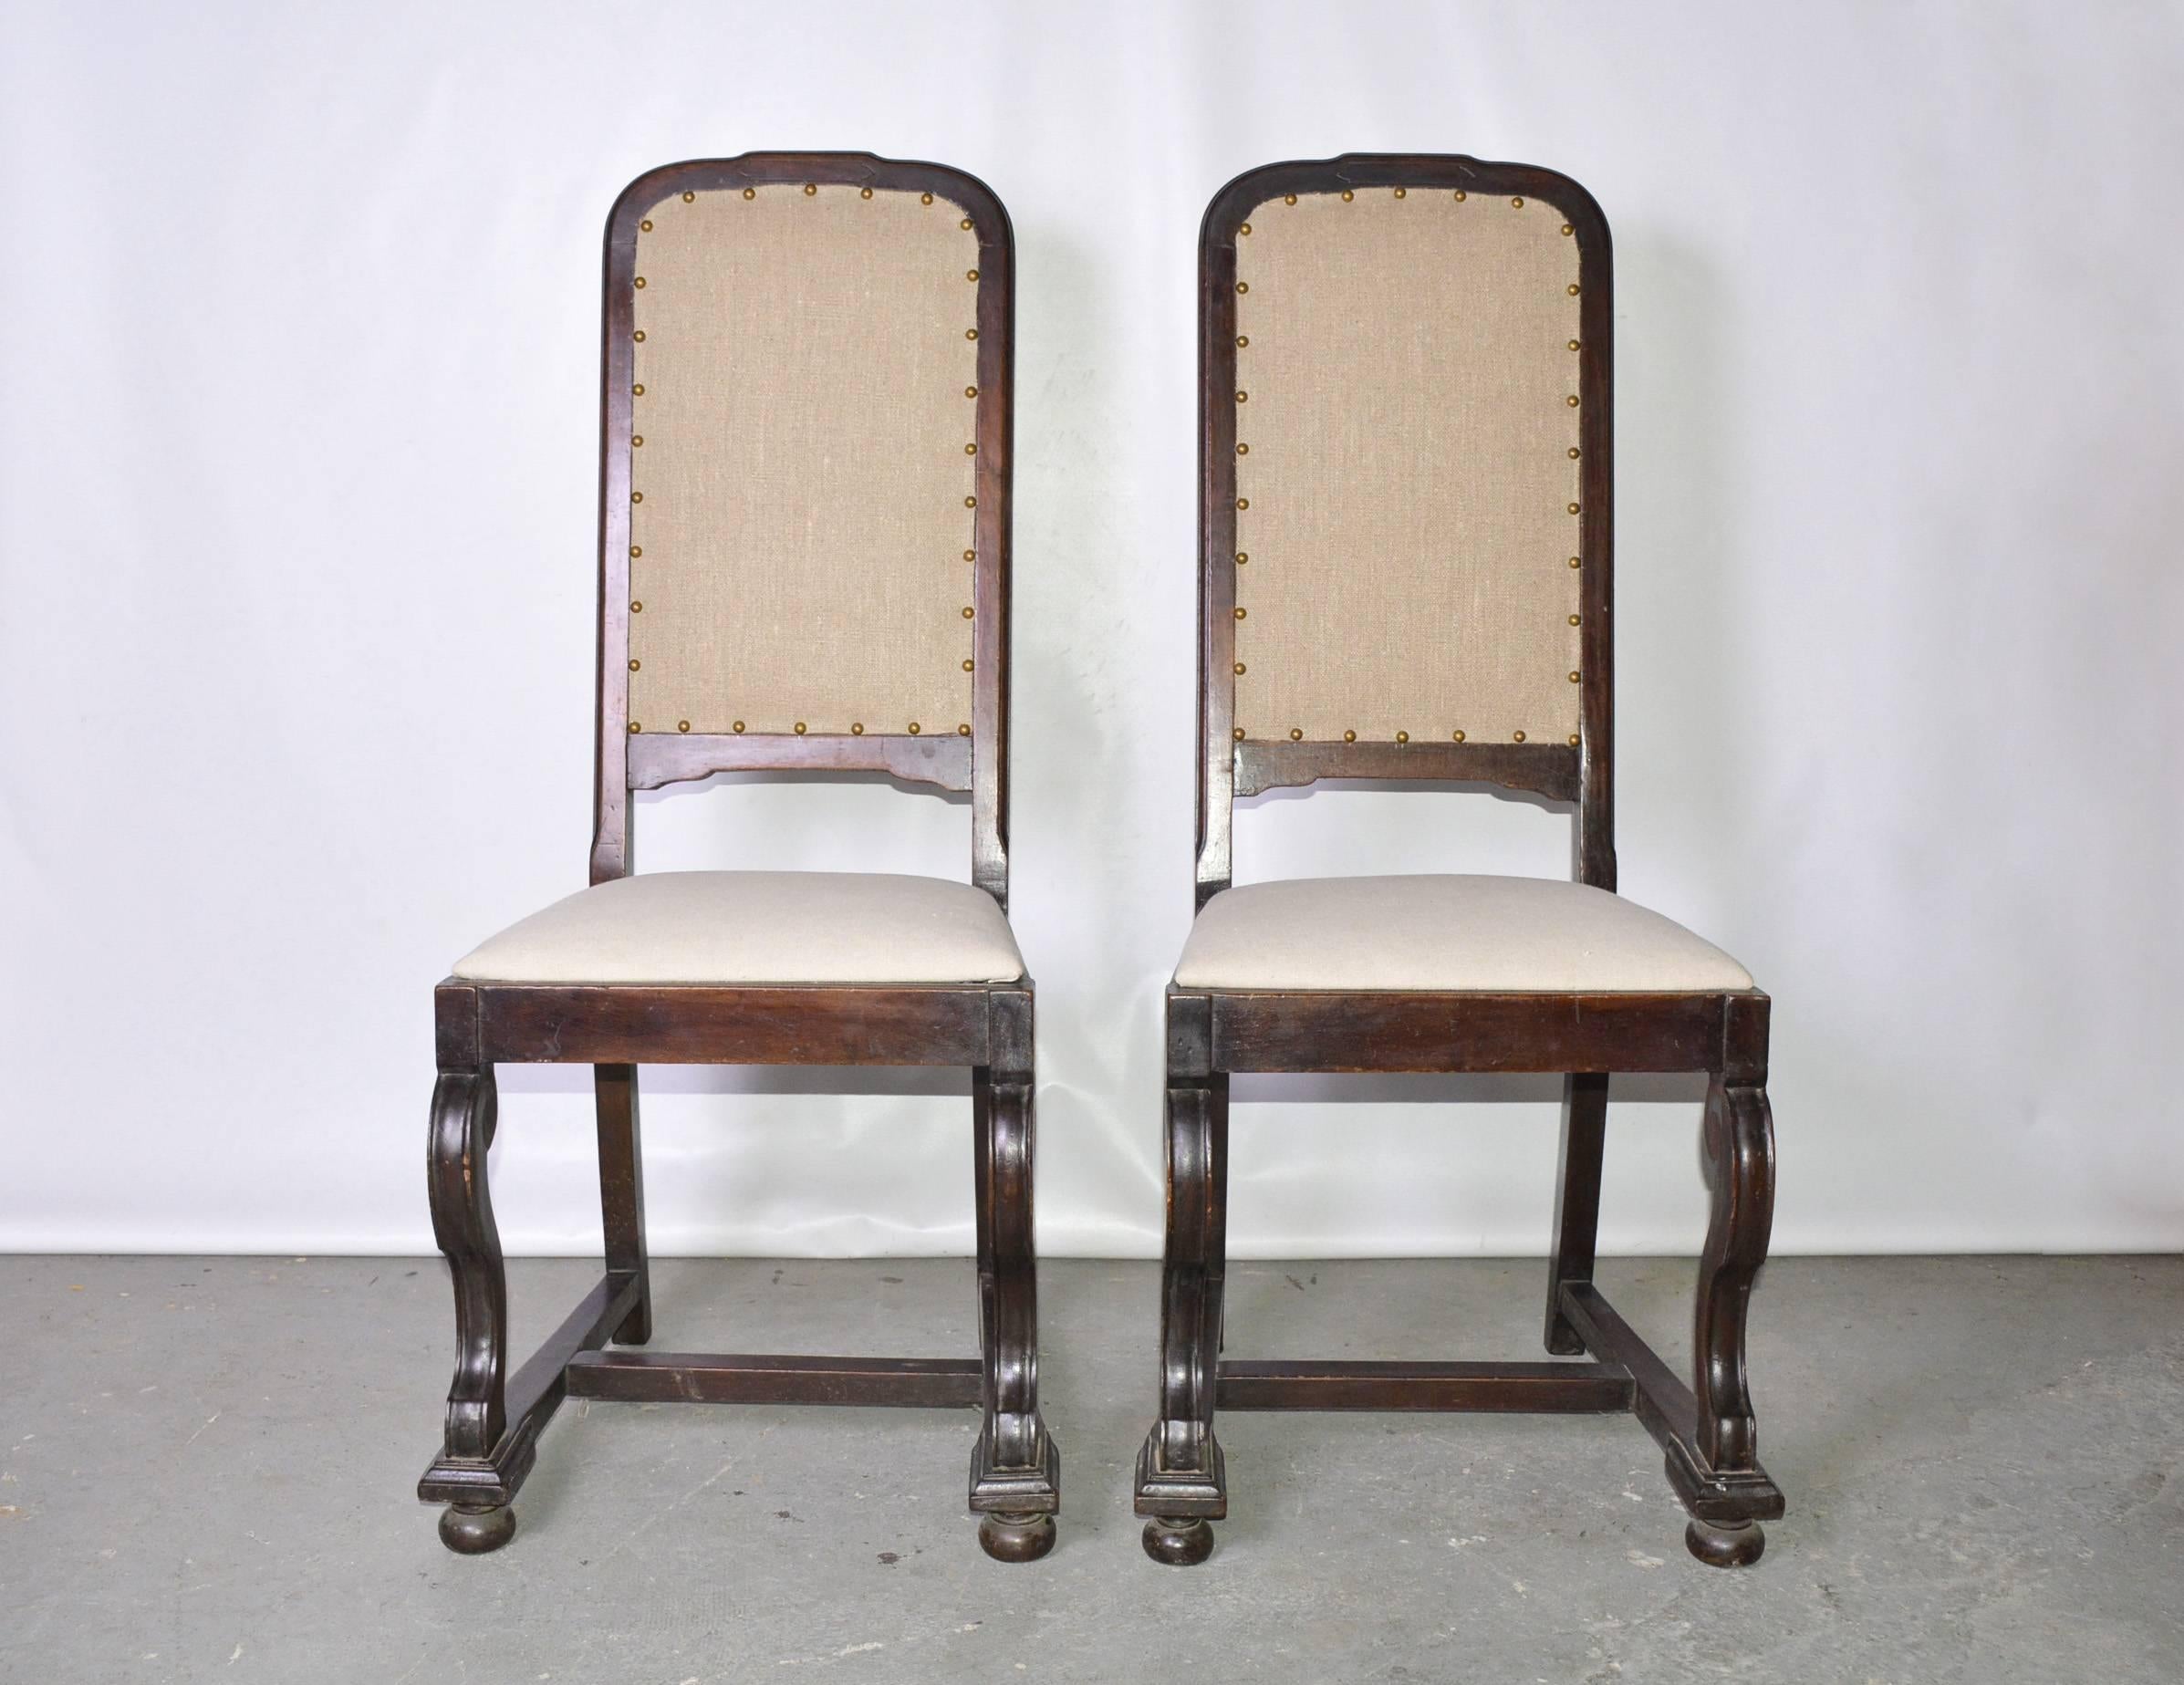 The pair of antique Jacobean-style mahogany side chairs, c.1900, are newly upholstered in one shade of beige linen while the seats are covered in another complementary shade of beige linen. Consider them for the hall or as occasional chairs in the